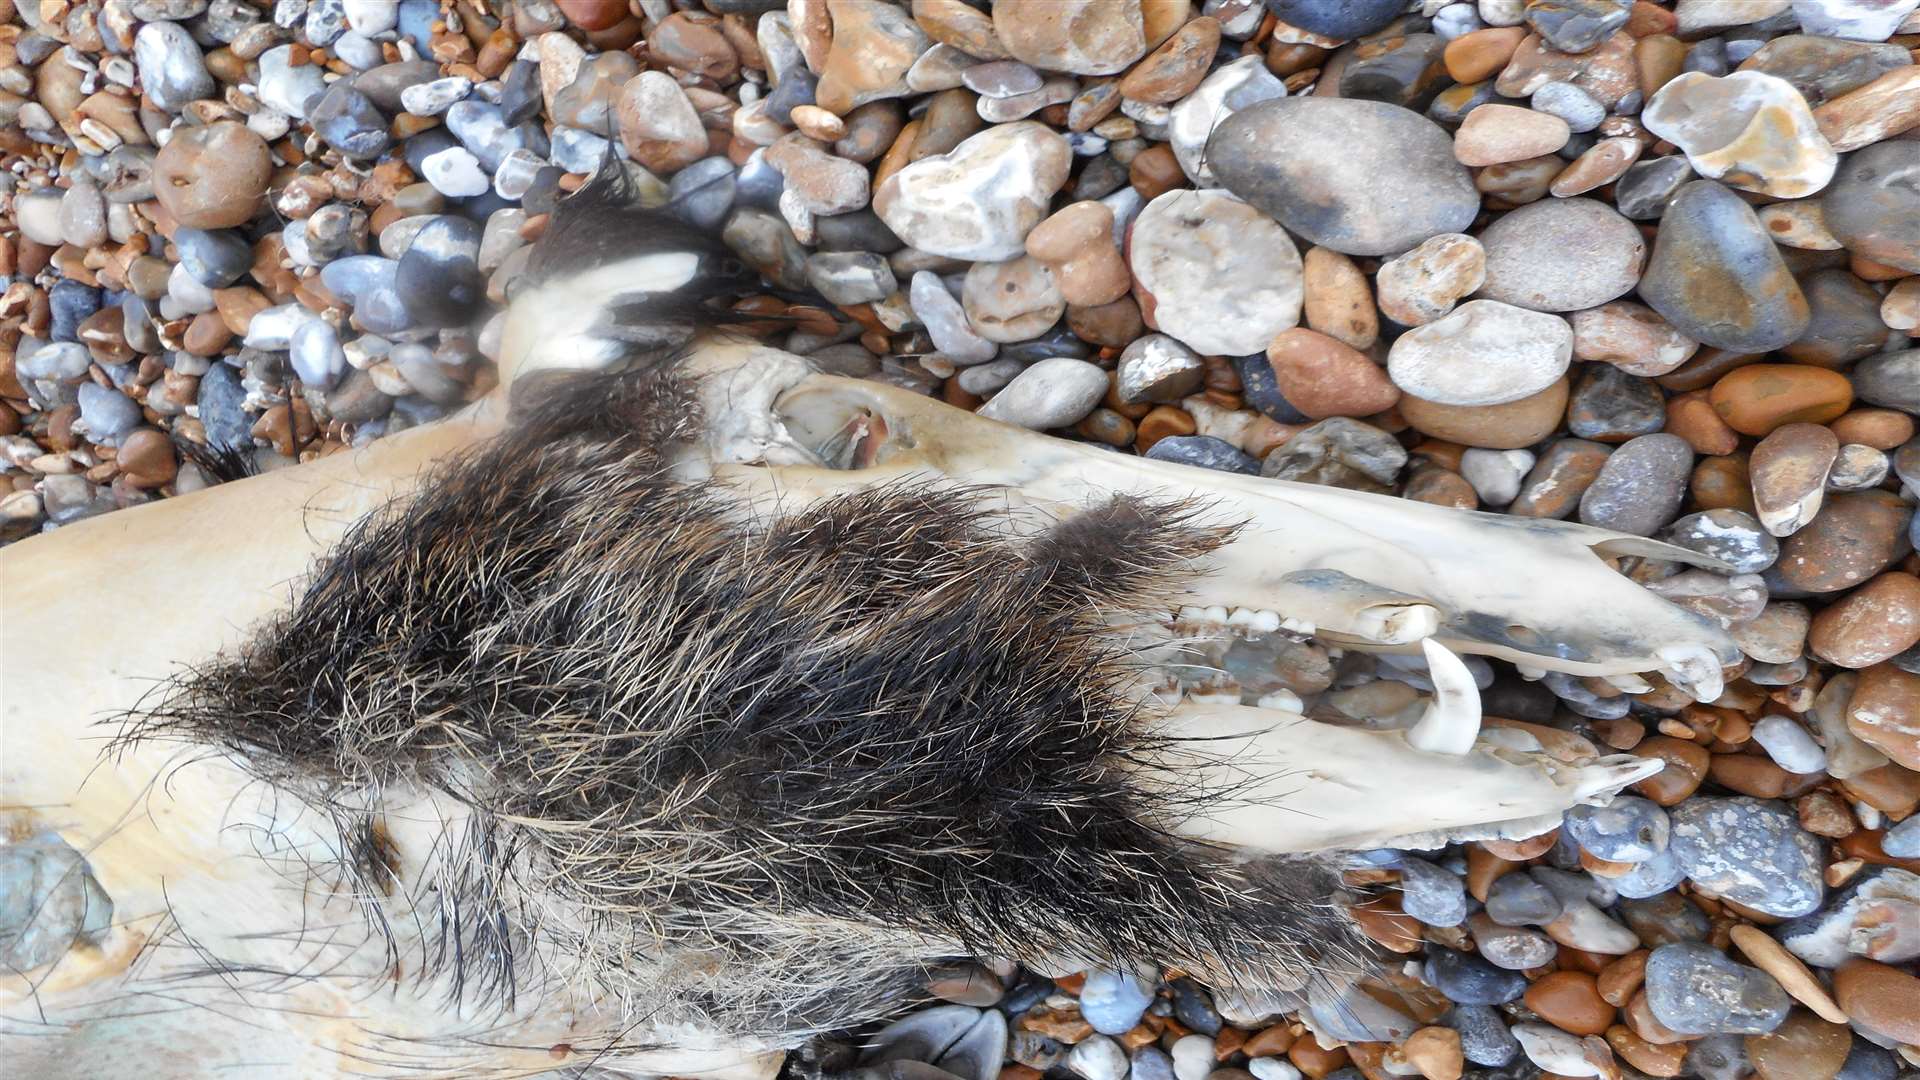 The wild boar was found on washed up on the shoreline at Lydd